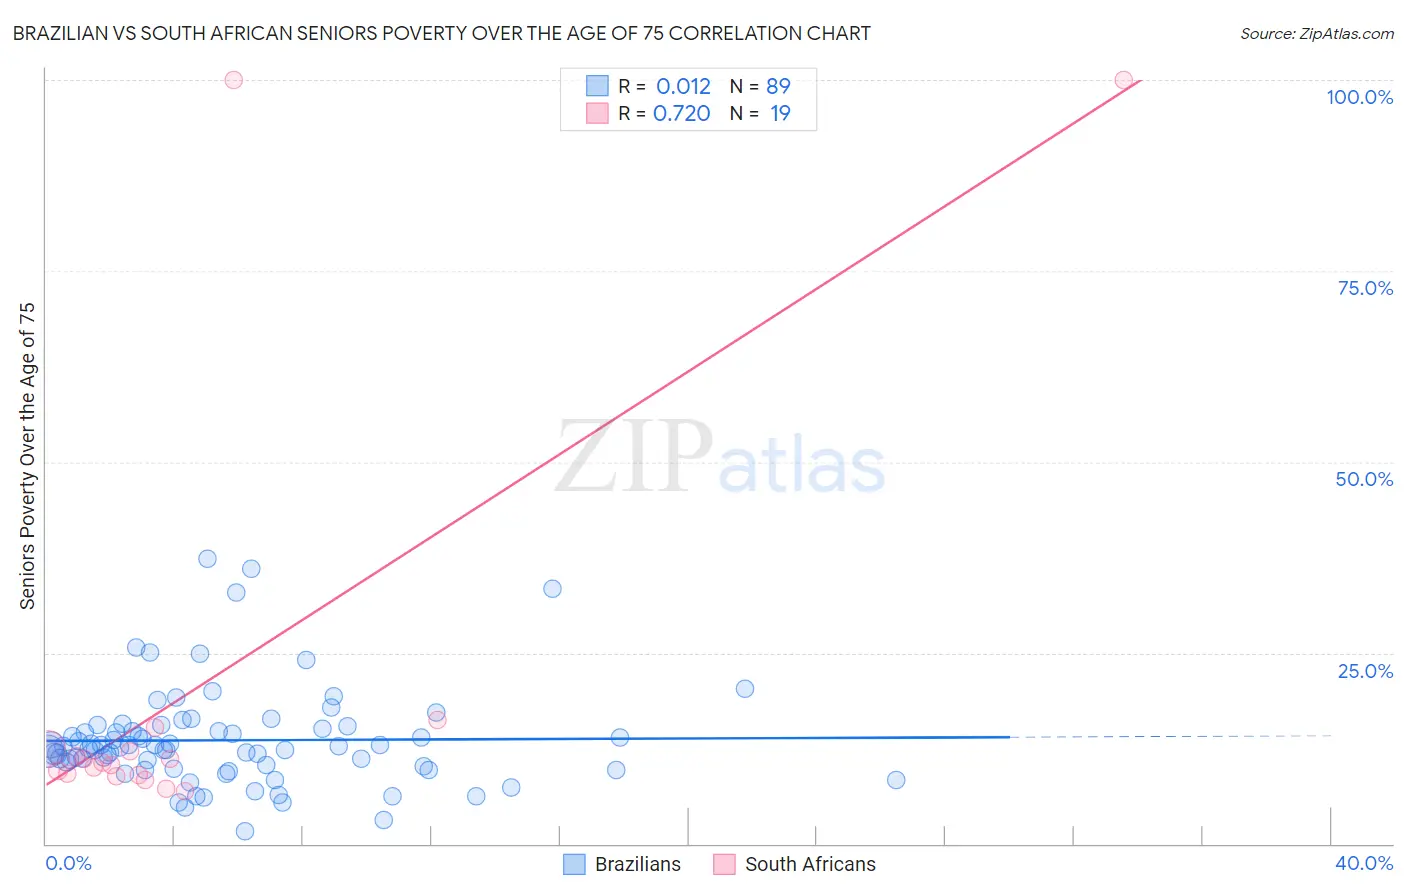 Brazilian vs South African Seniors Poverty Over the Age of 75